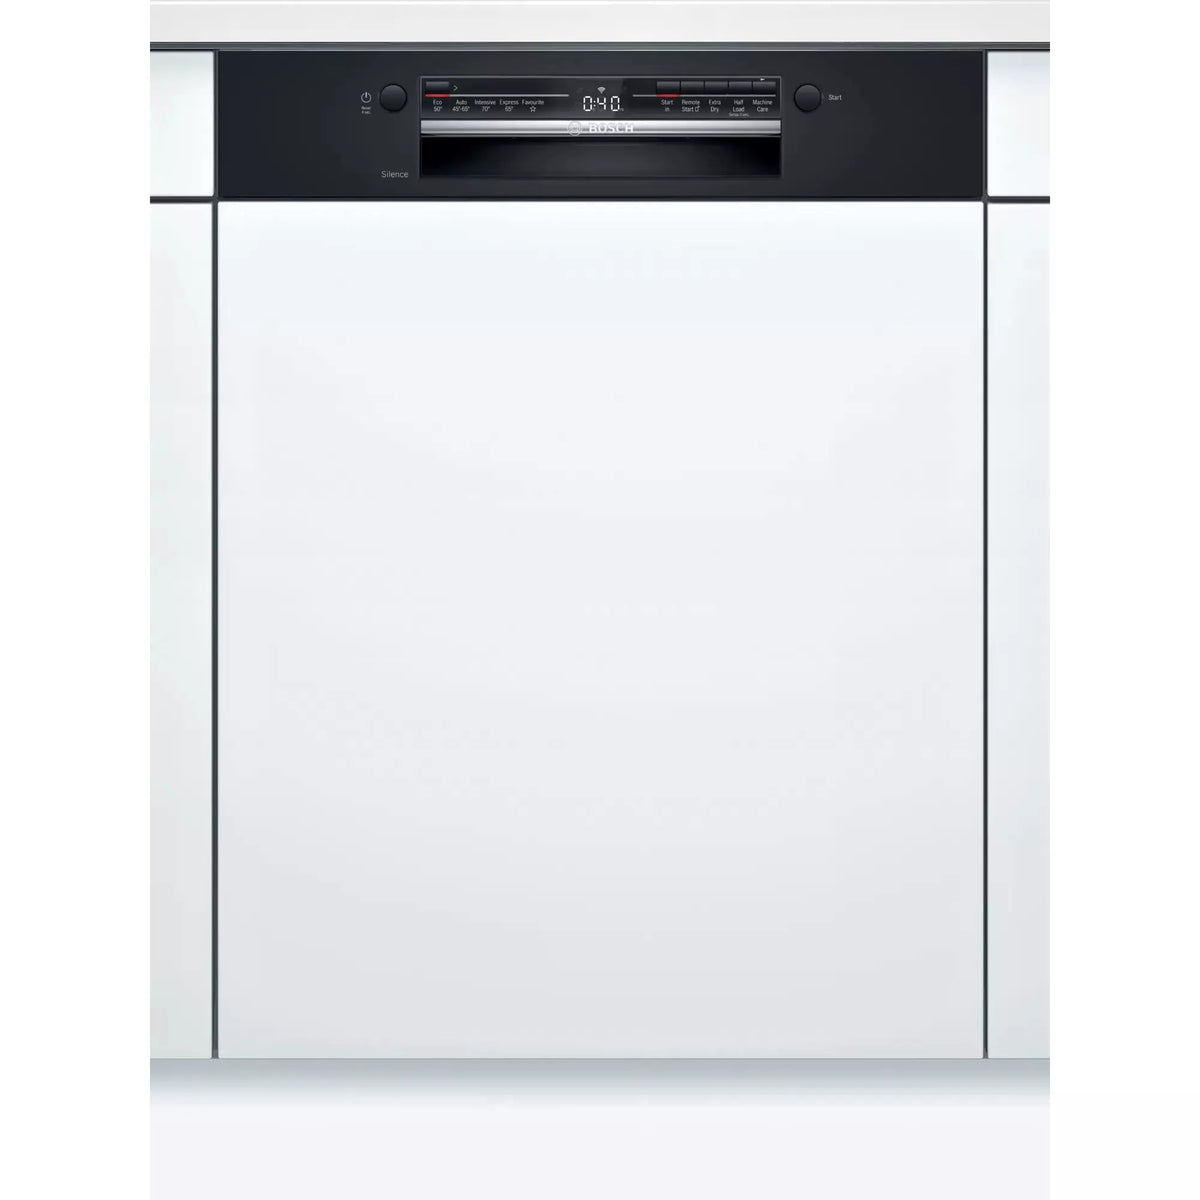 Bosch Series 2 60CM Semi-integrated Dishwasher - Black | SMI2ITB33G from Bosch - DID Electrical